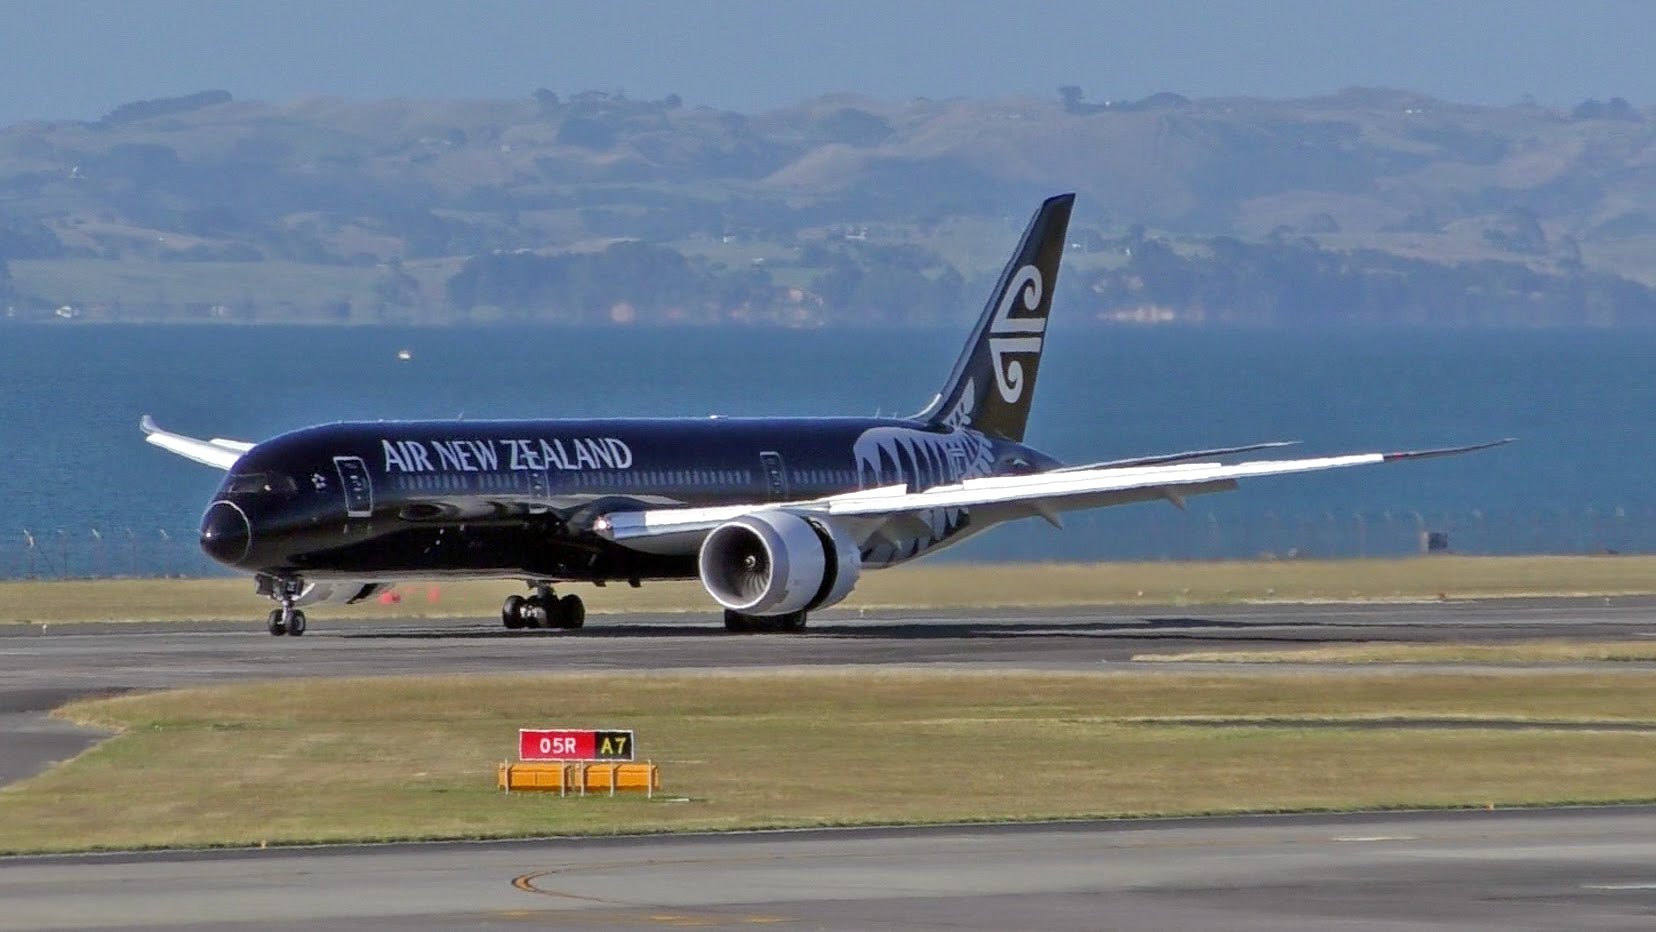 Air New Zealand’s Dreamliner landing takes-off